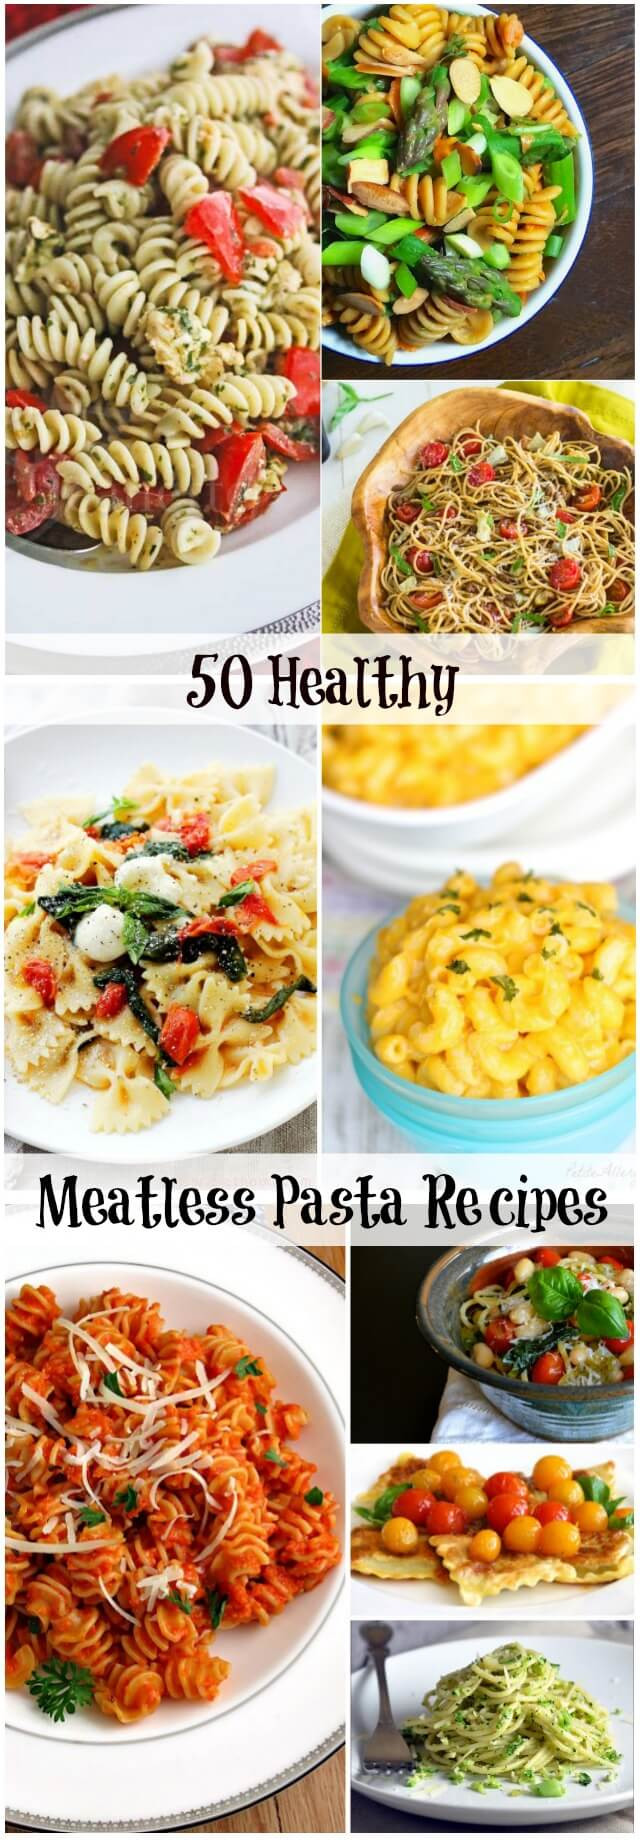 Healthy Vegetarian Pasta Recipes
 ALL PROBLEMS SOLUTIONS 50 Easy Healthy Meatless Pasta